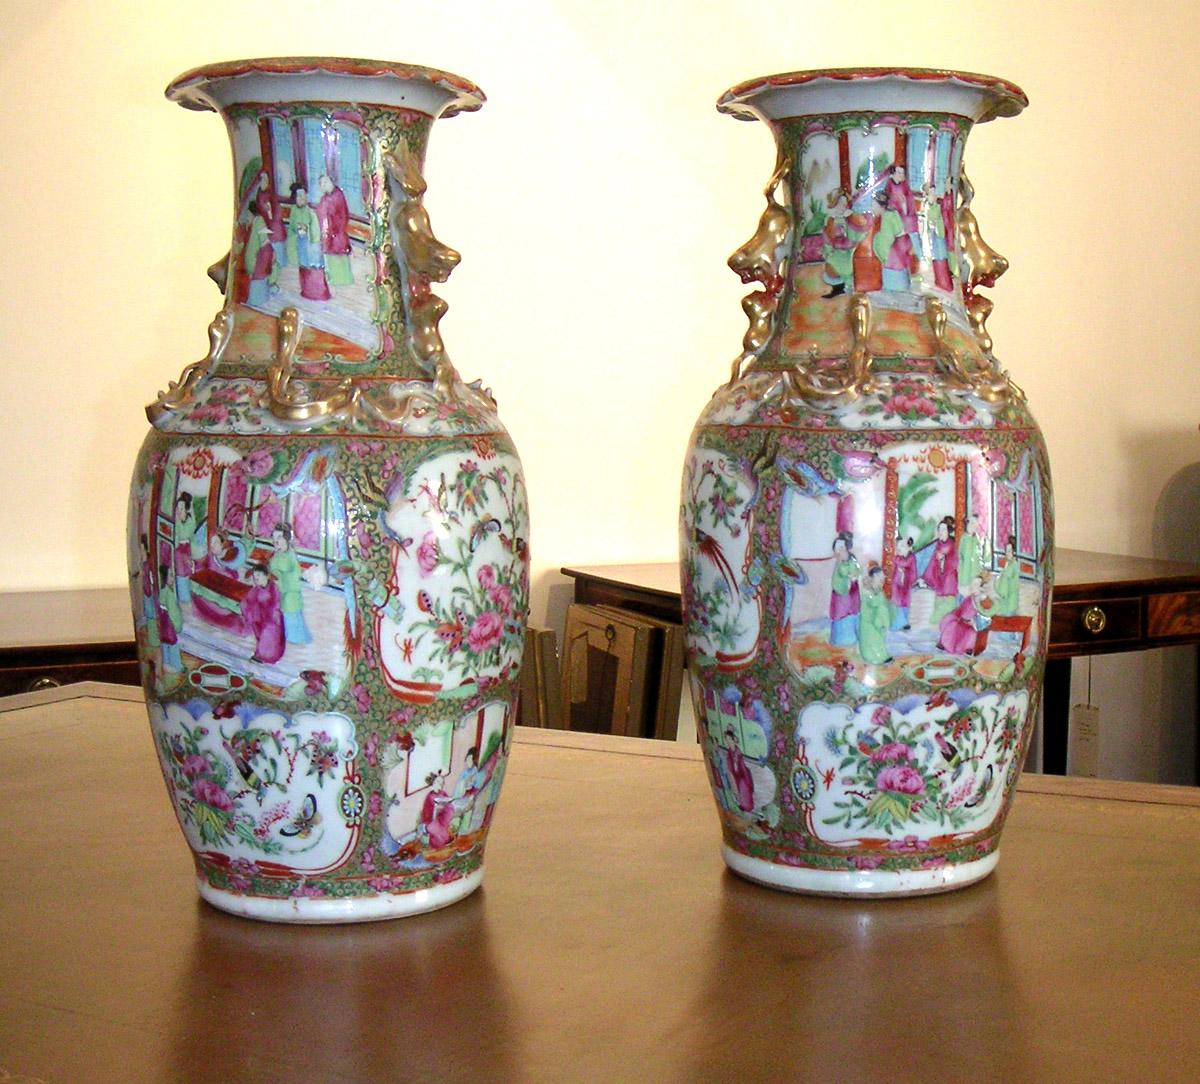 A good large pair of Chinese Canton vases converted into lamps (with damage and restoration).